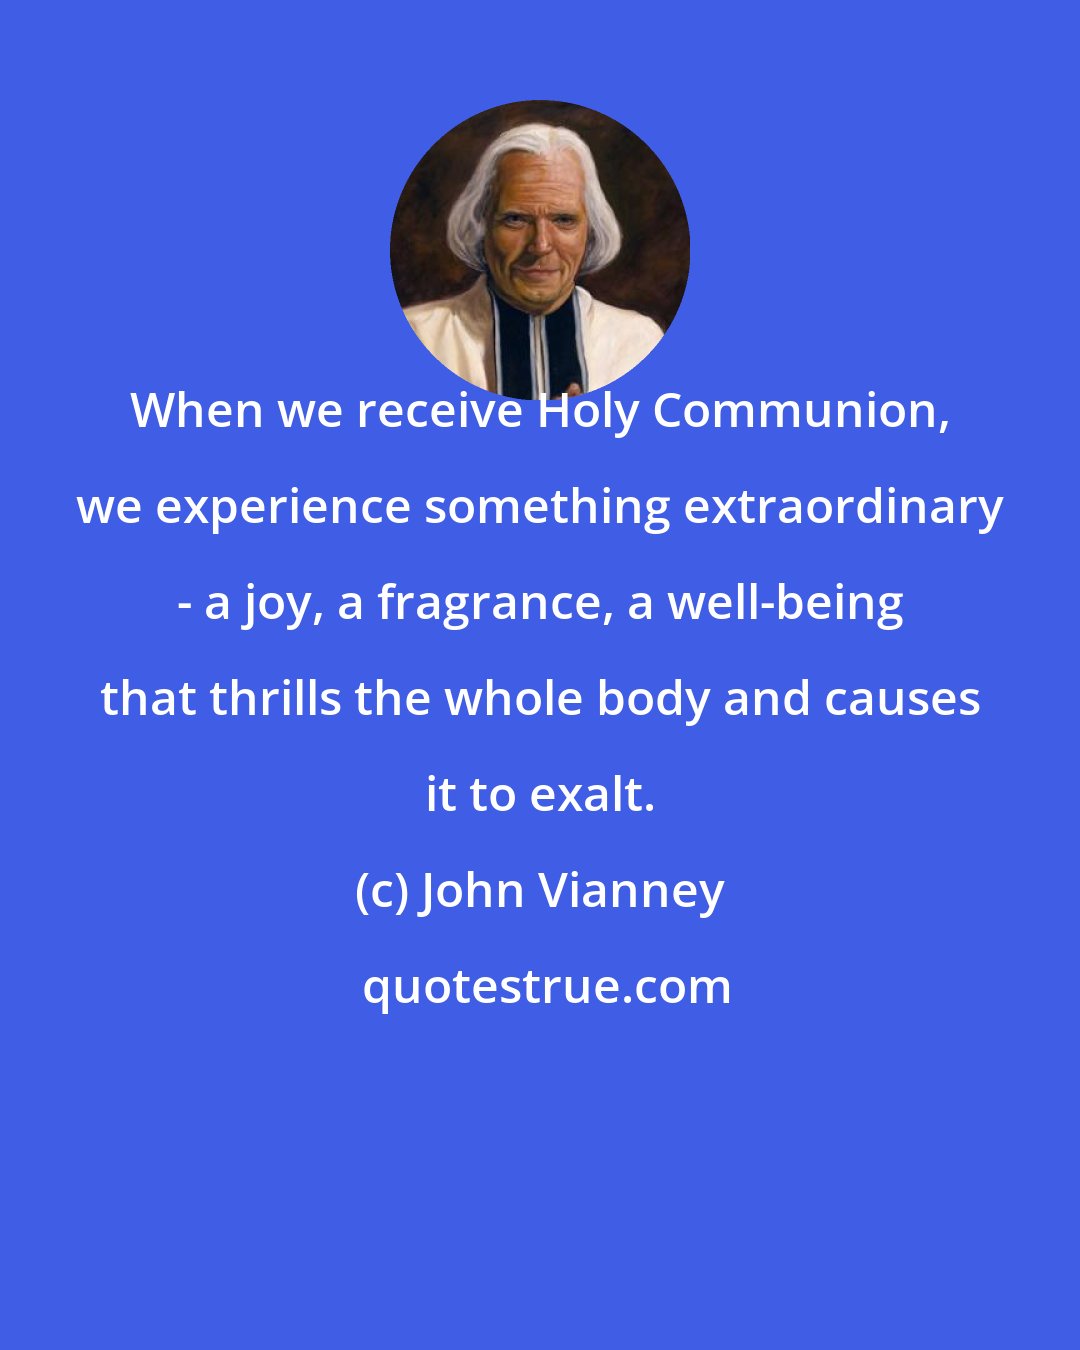 John Vianney: When we receive Holy Communion, we experience something extraordinary - a joy, a fragrance, a well-being that thrills the whole body and causes it to exalt.